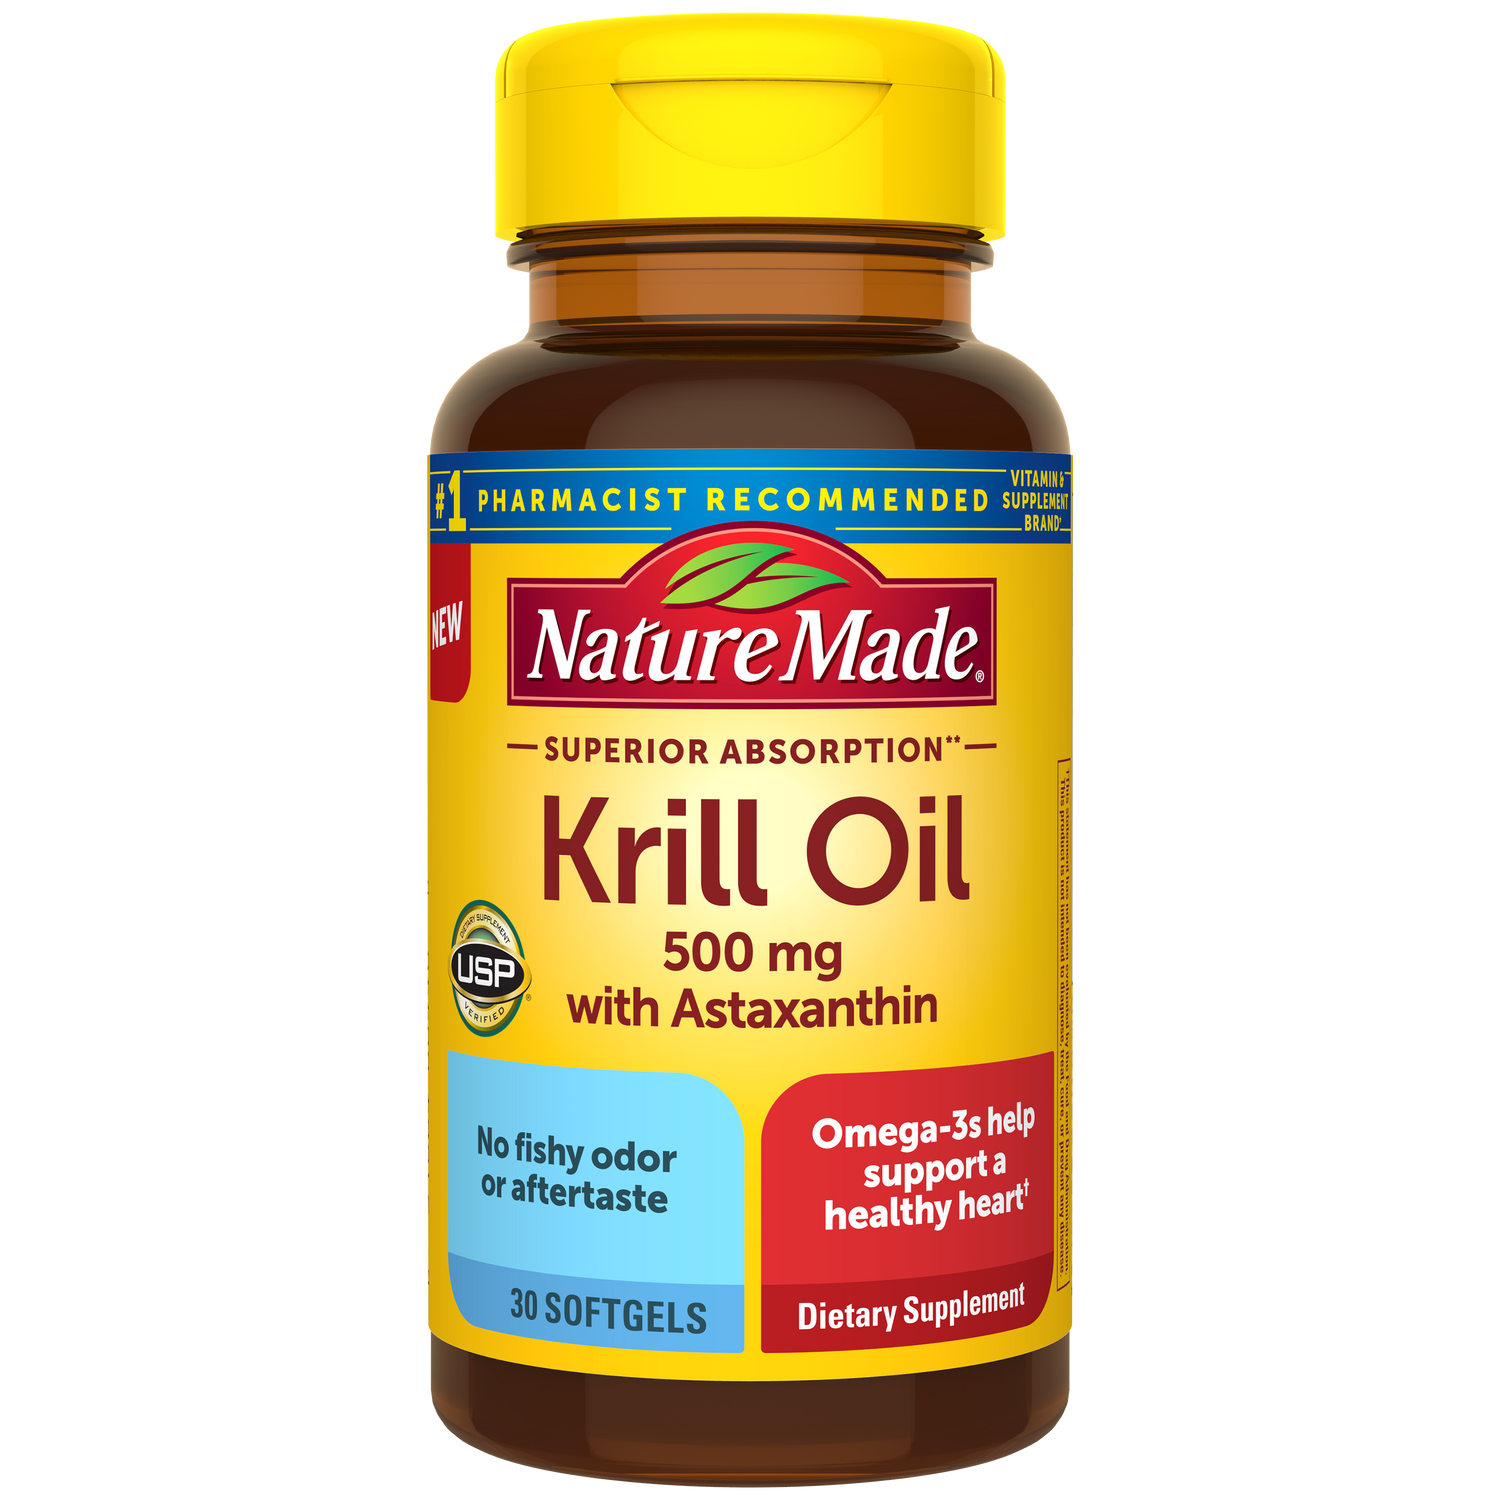 Nature Made Superior Absorption** Krill Oil 500 Mg Softgels